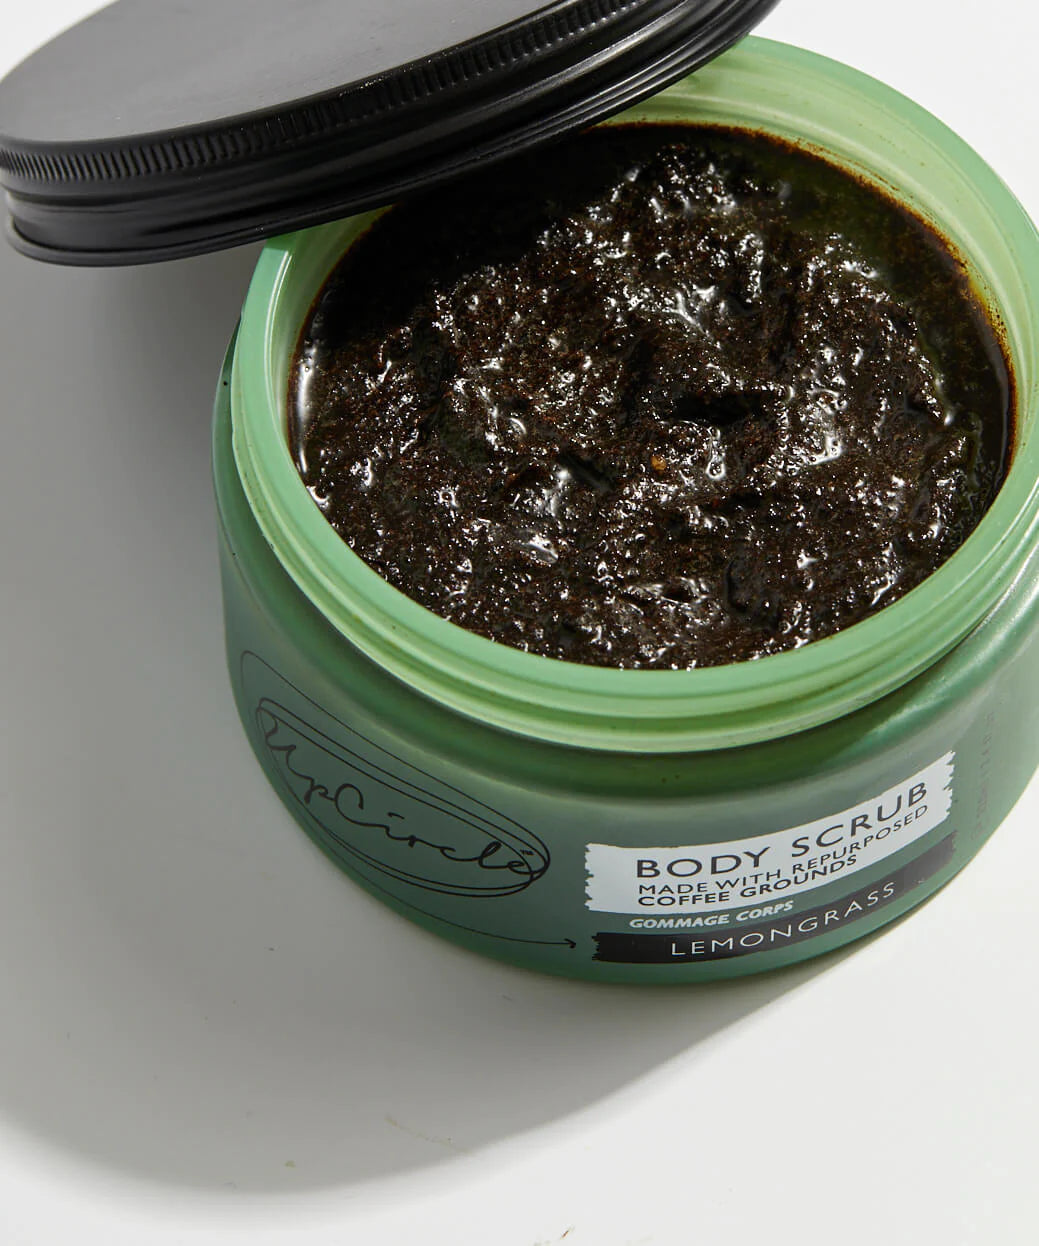 UpCircle Coffee Body Scrub with Lemongrass is formulated with repurposed natural ingredients, it is a gentle exfoliant, Shea butter conditions the skin, while Arabica coffee grounds sourced from artisan coffee shops act as a natural scrub and lemongrass, lime and coconut oils provide nourishment.